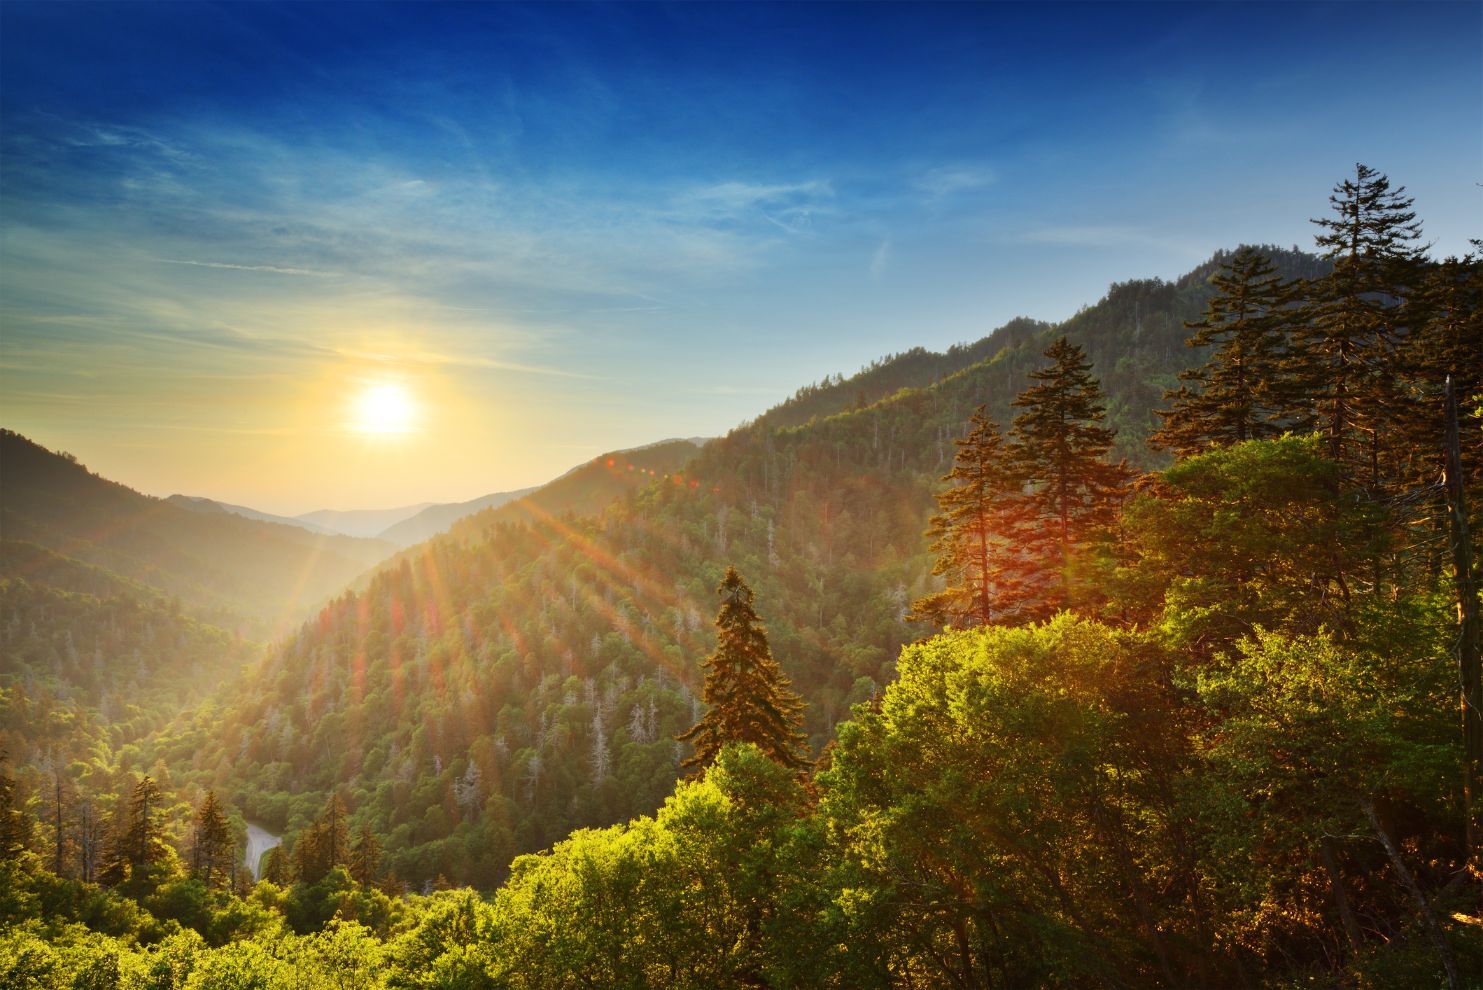 A beautiful view over the New Found Gap in the Great Smoky Mountains. Photo: Getty